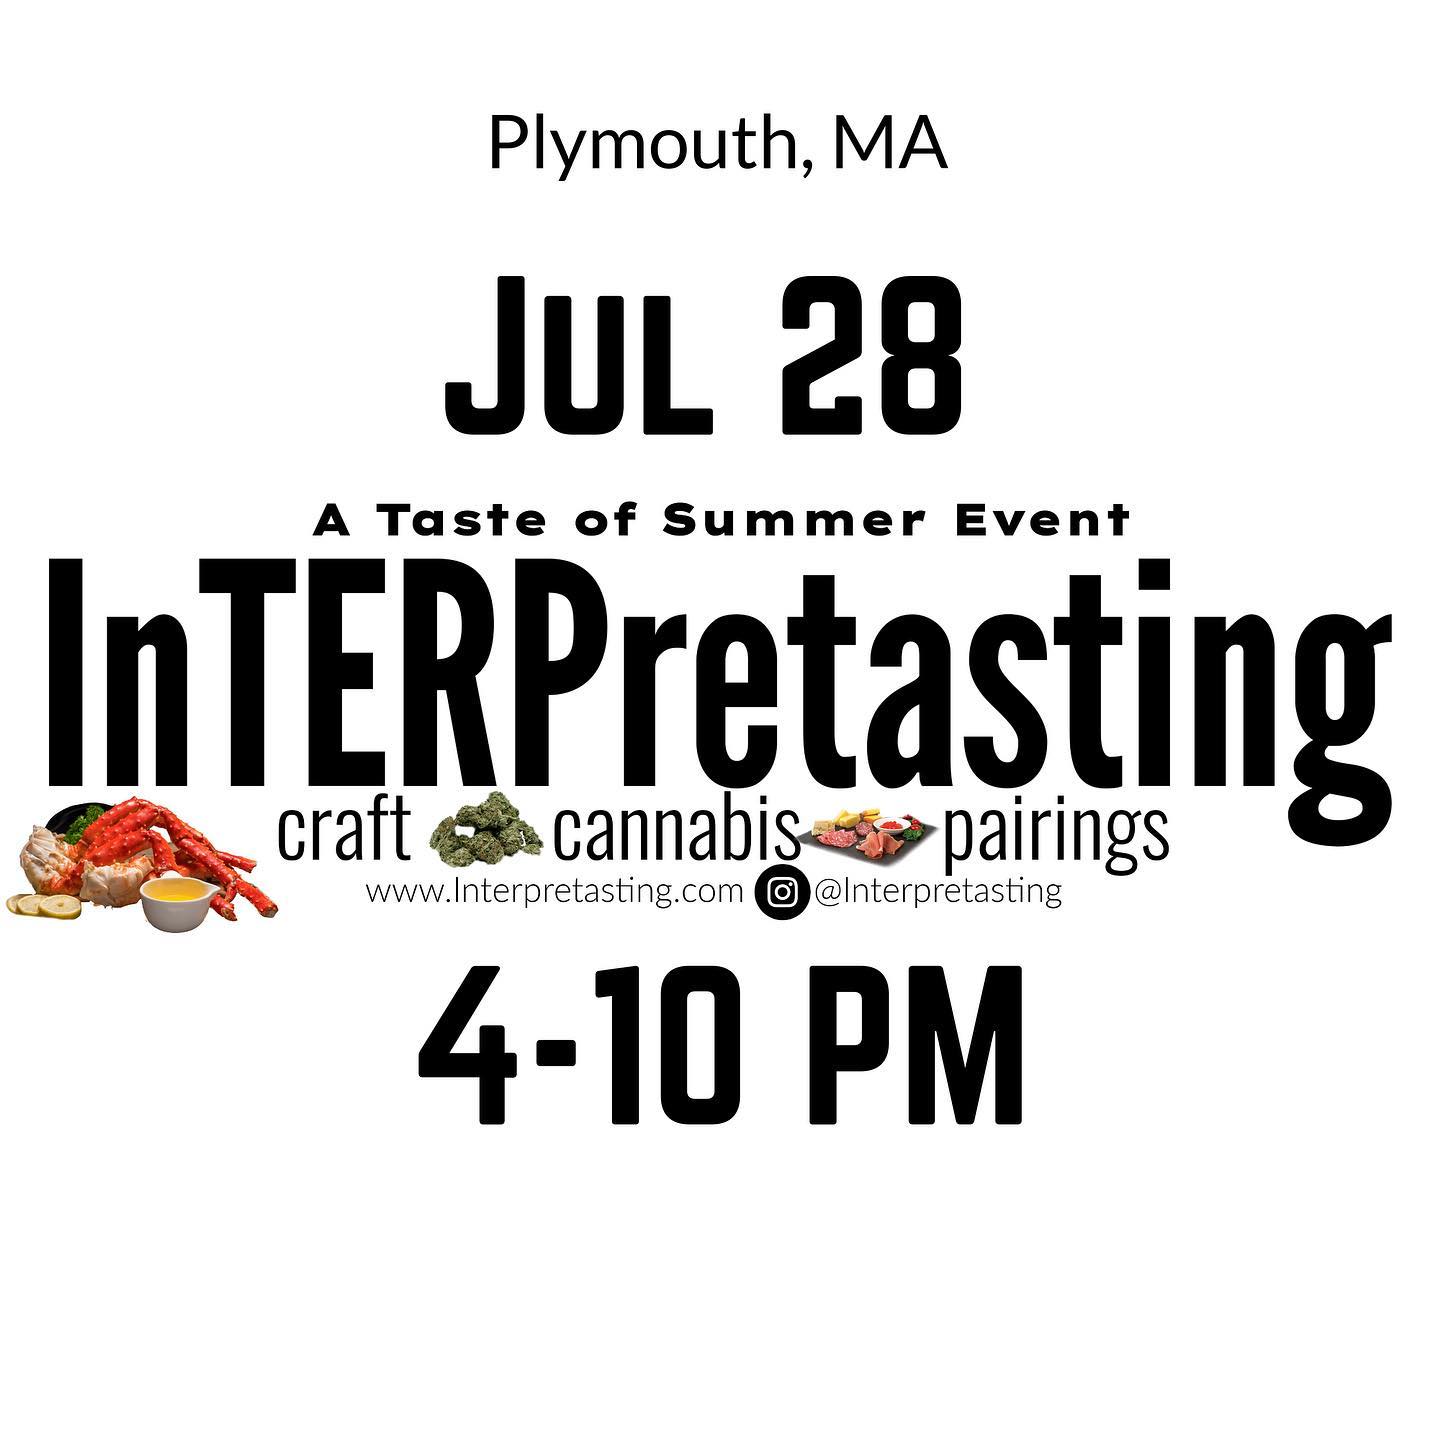 Announcing the "A Taste of Summer" Interpretasting Event in Plymouth